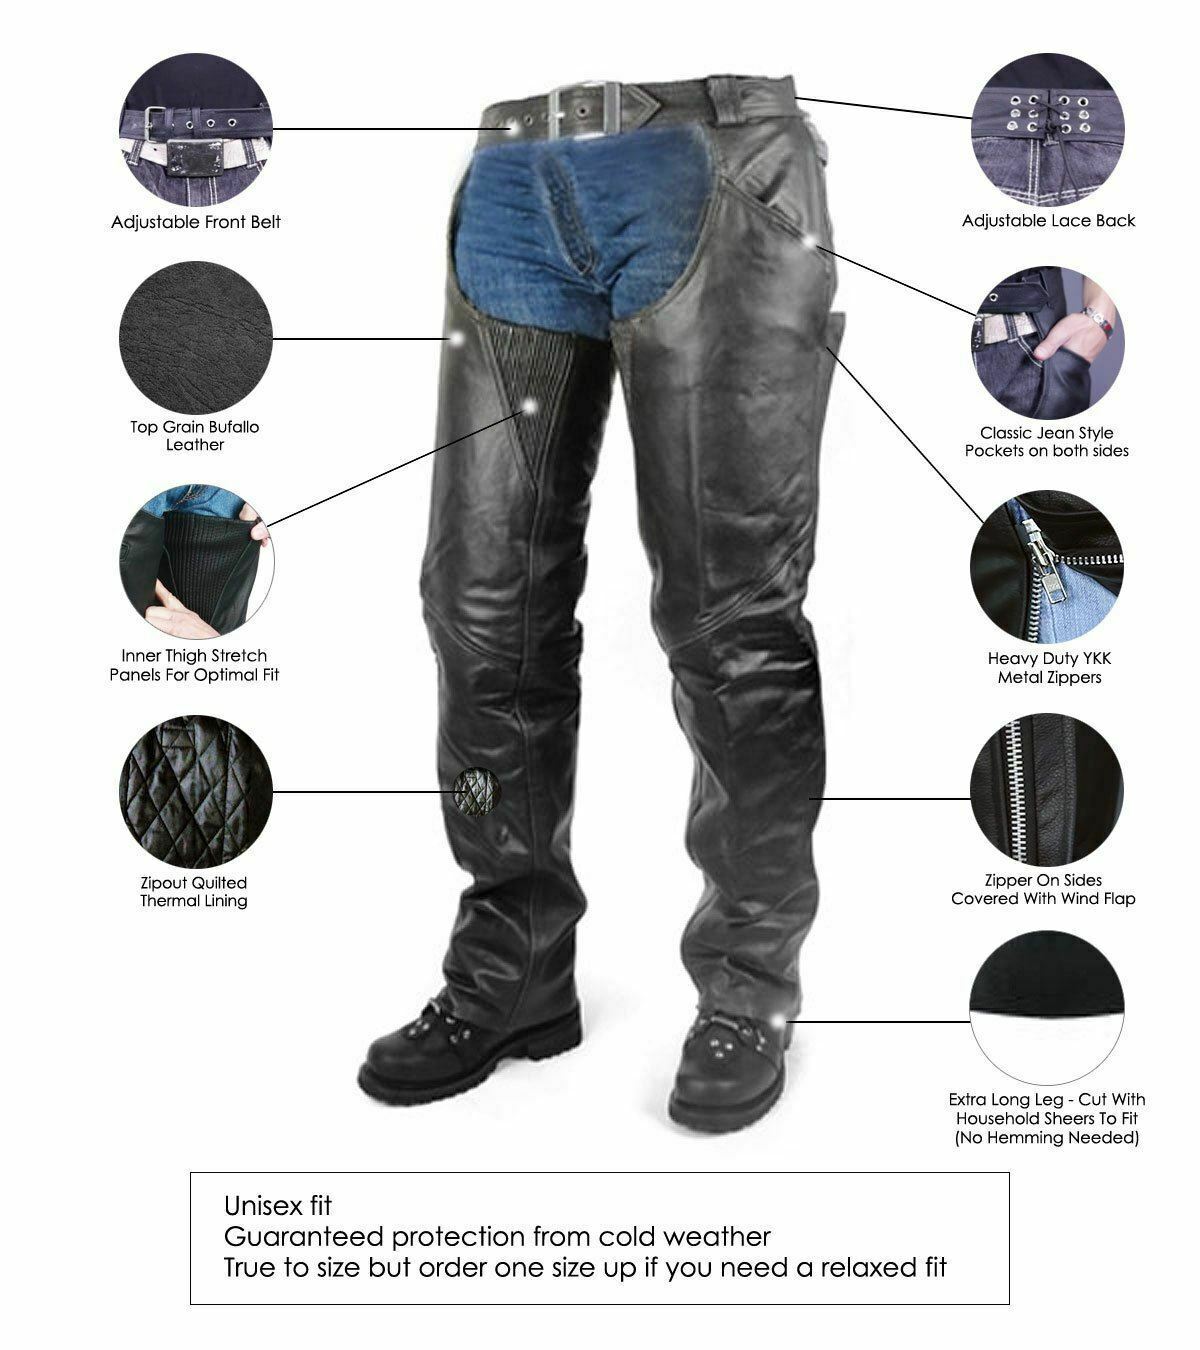 Mens Motorcycle Black Leather Pants Jeans Style Motorcycle Riding Pants for  Biker with 5 Pockets